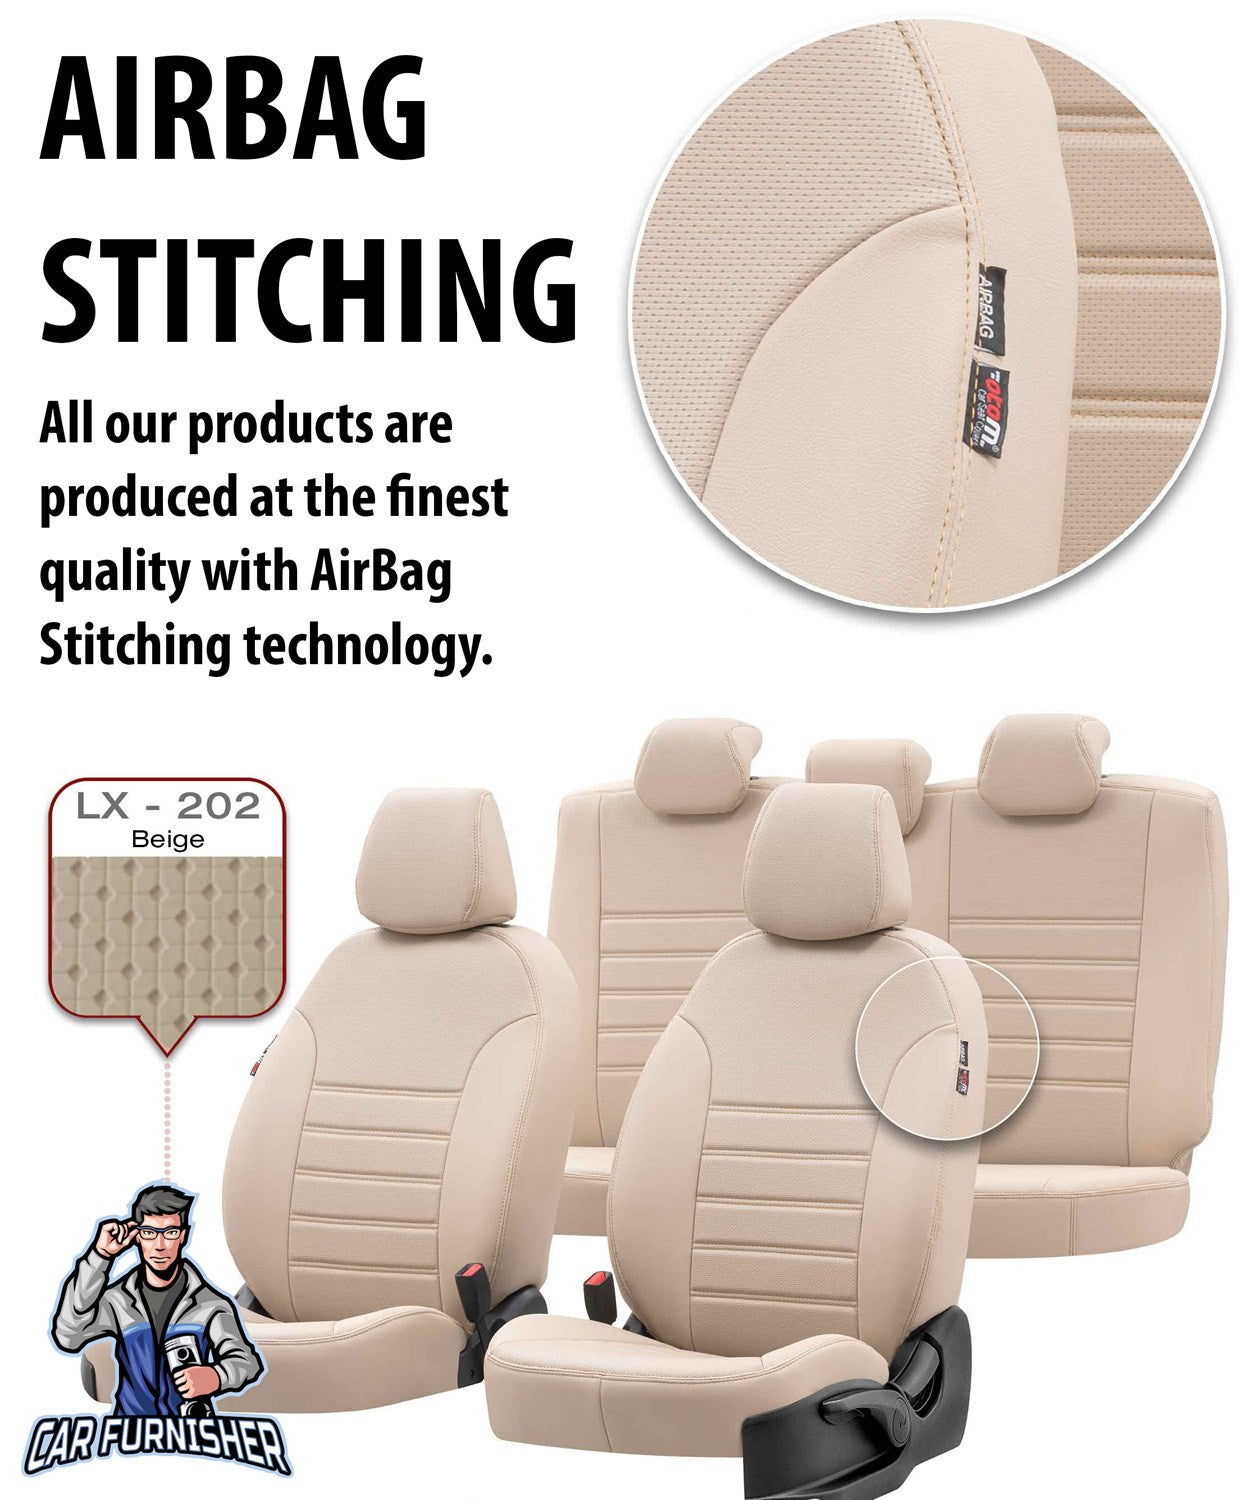 Volkswagen Transporter Seat Cover New York Leather Design Smoked Leather